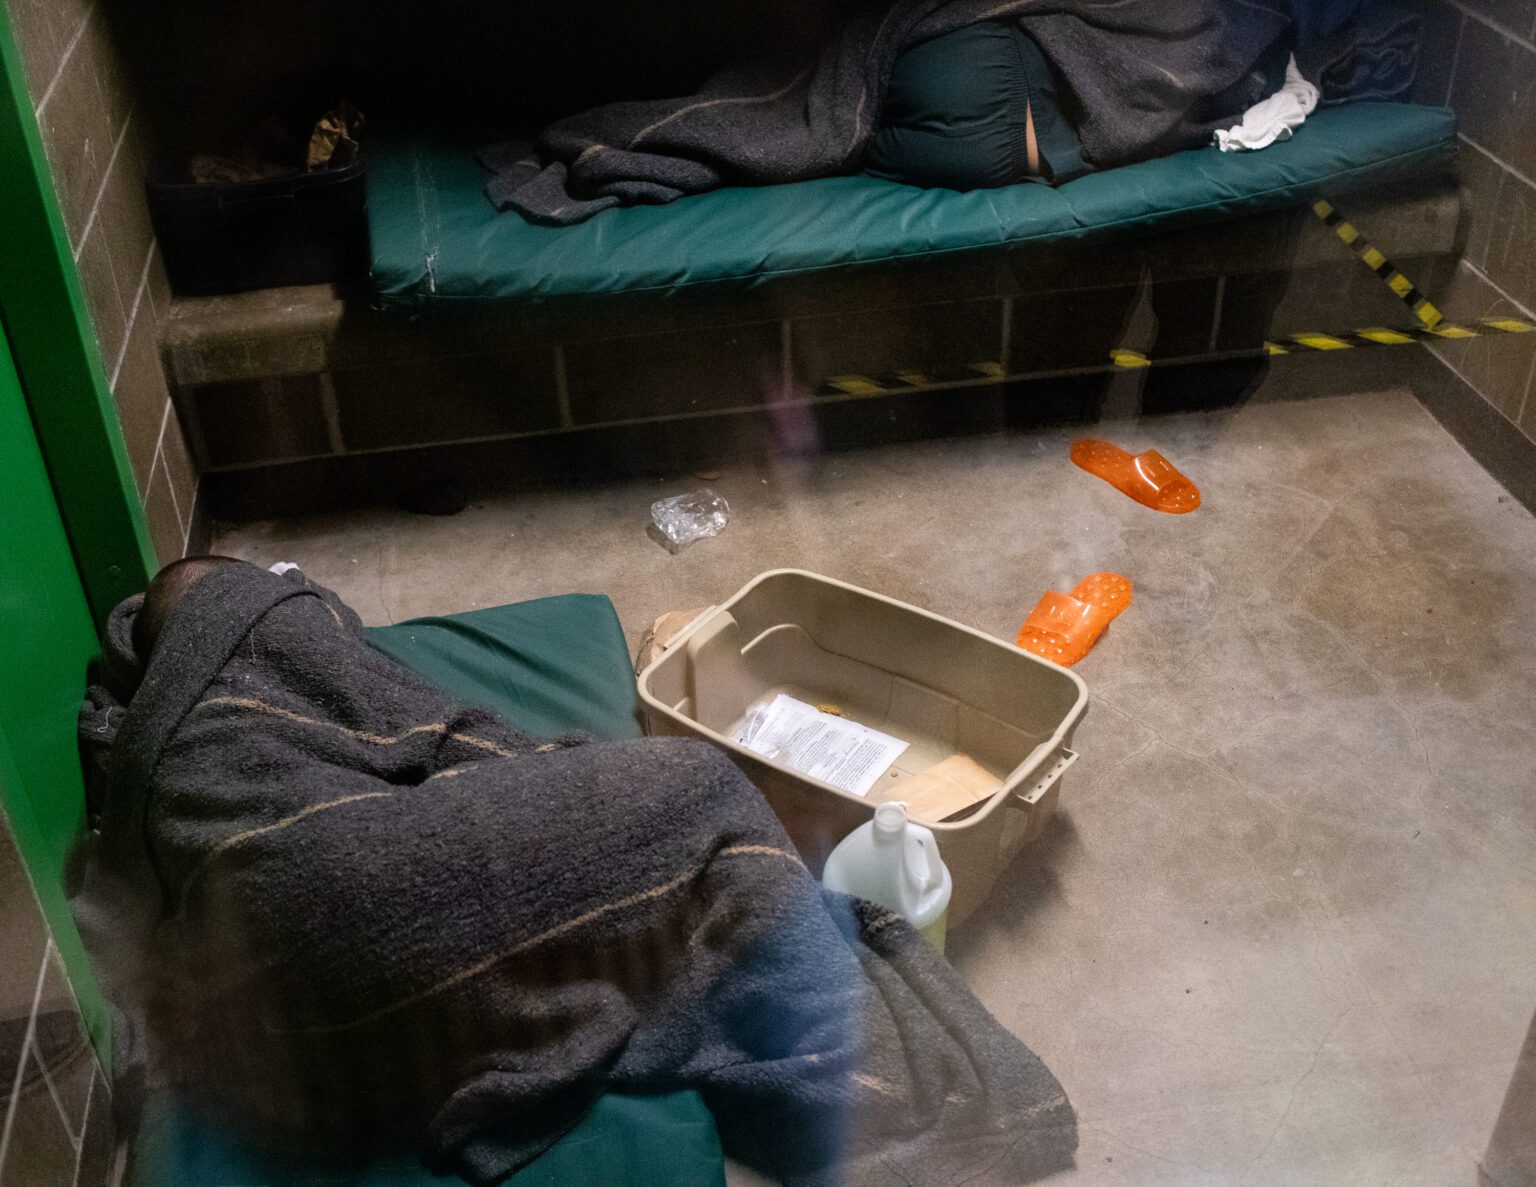 Two people under blankets sleep on green pads in a cemented jail sell. A plastic tub and orange slippers are sprawled across the cement floor.